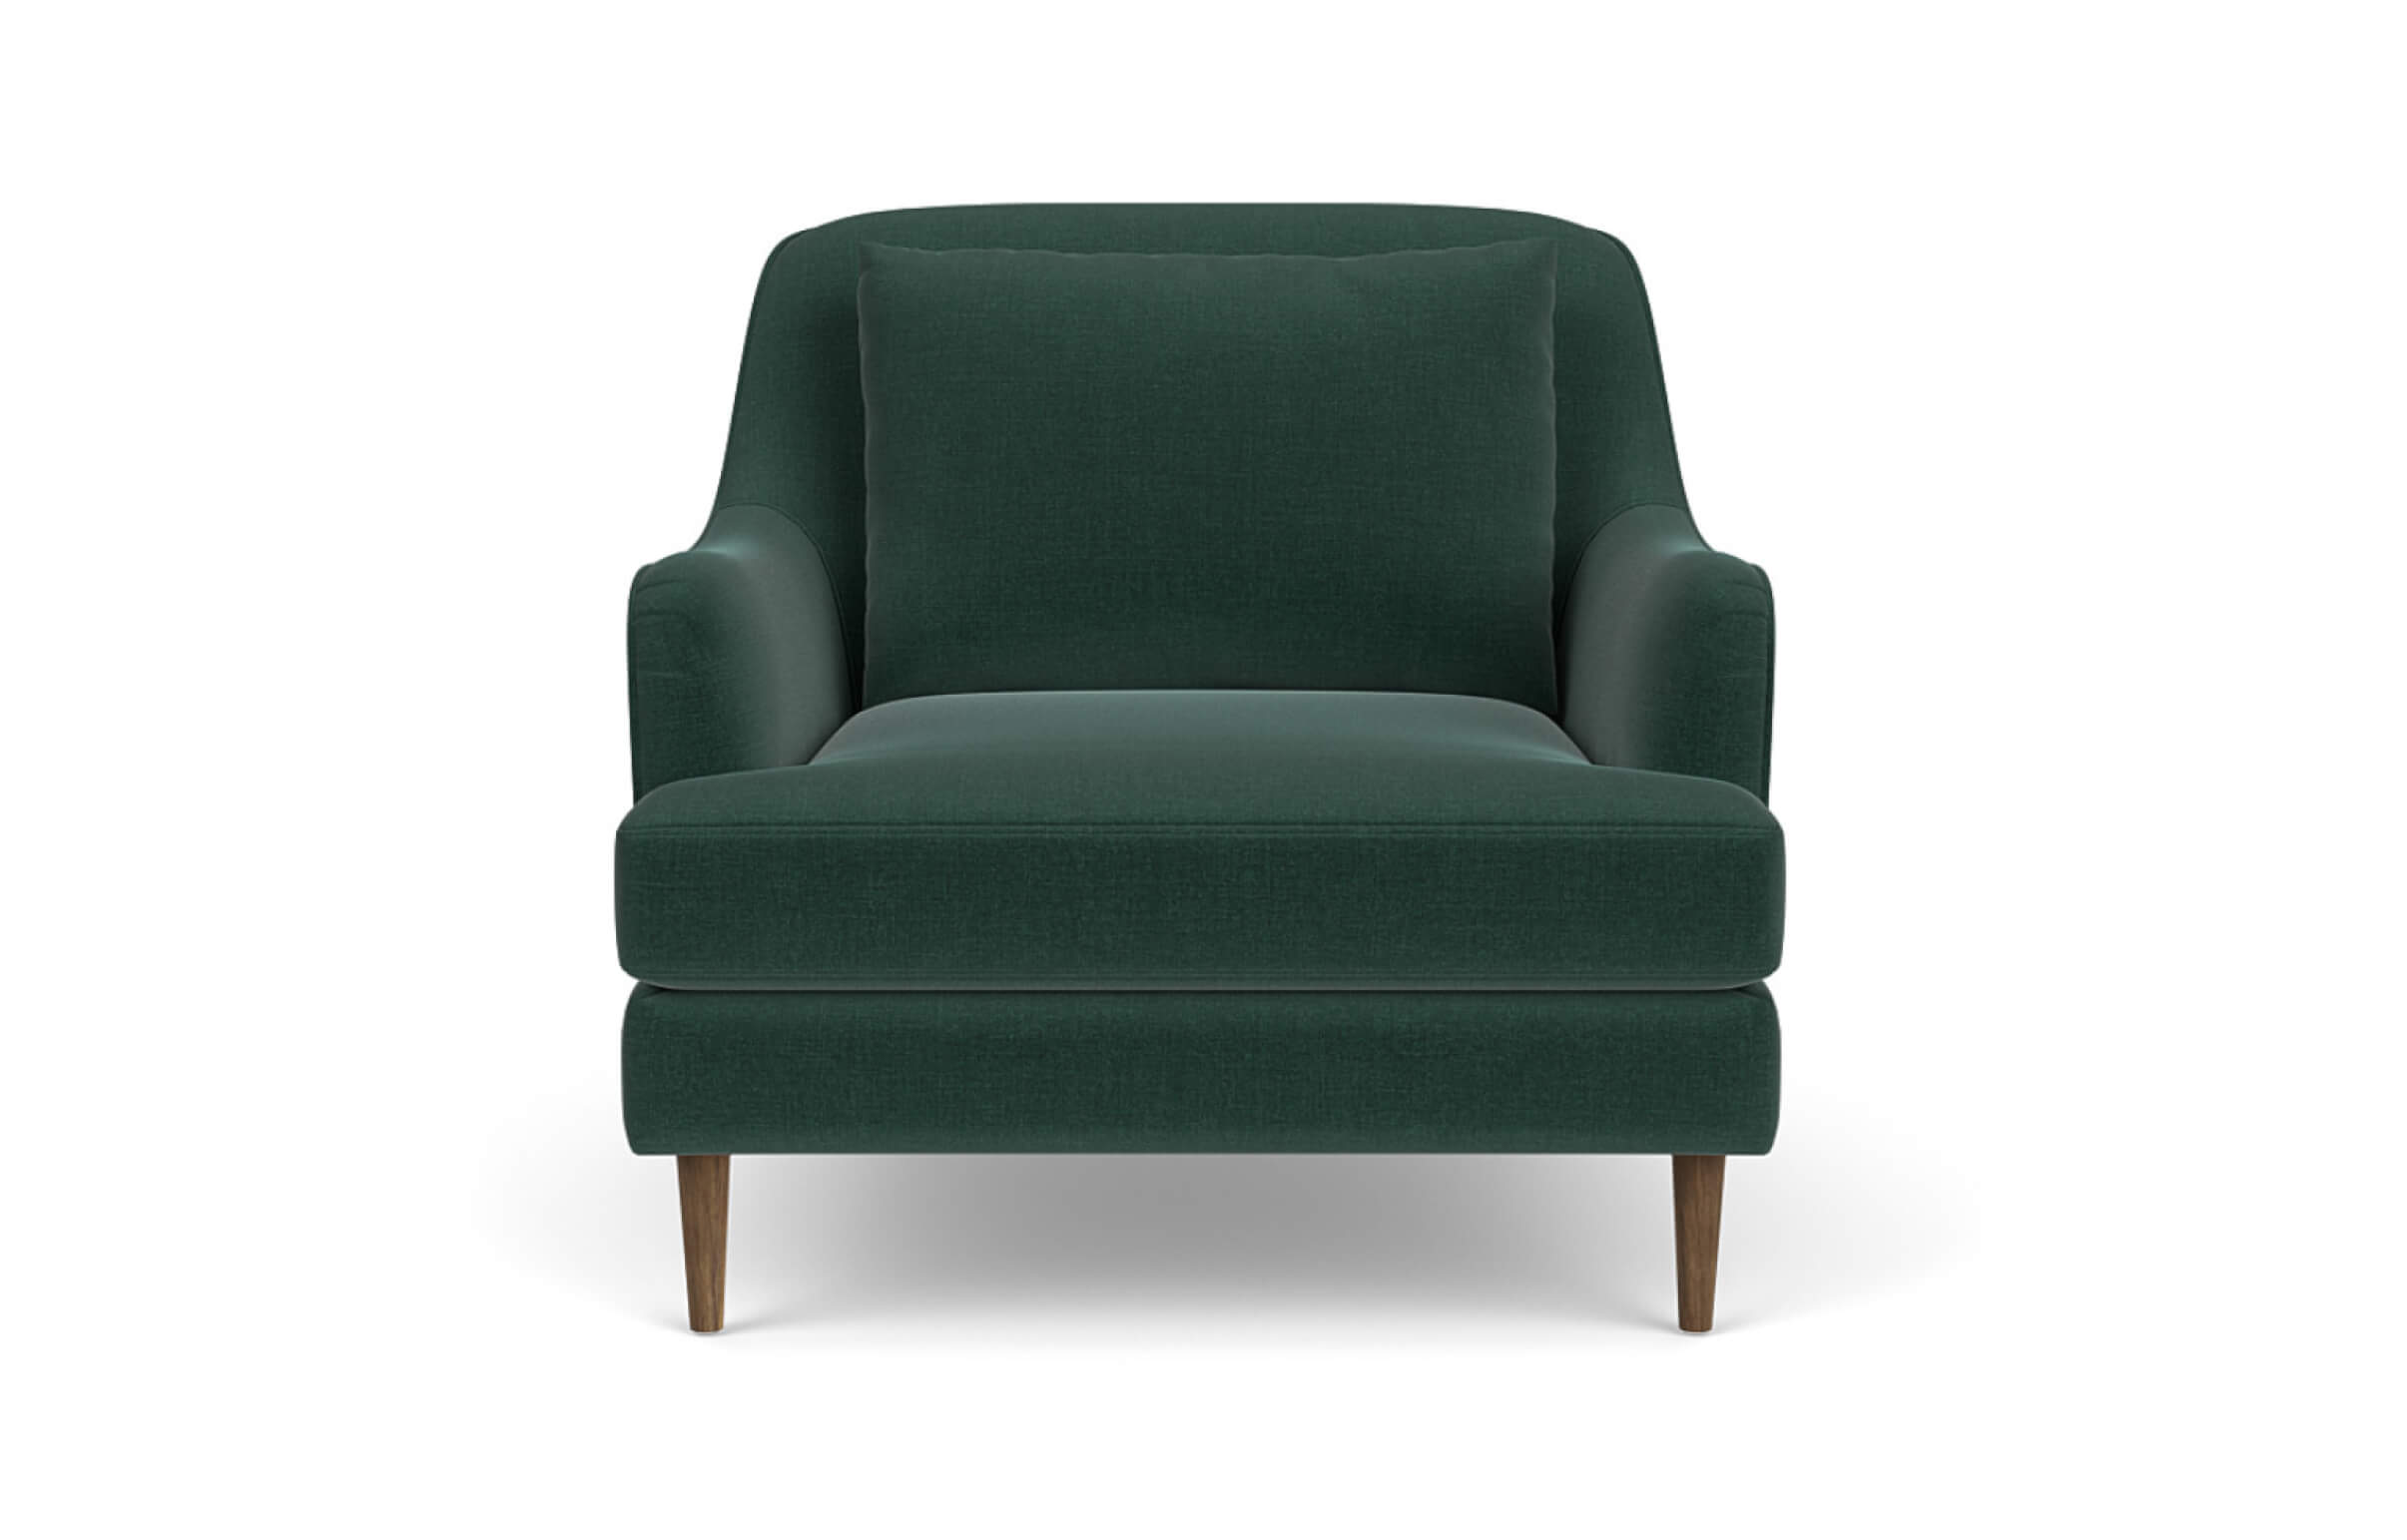 G: Kaydan Chair in Deluxe Peacock fabric